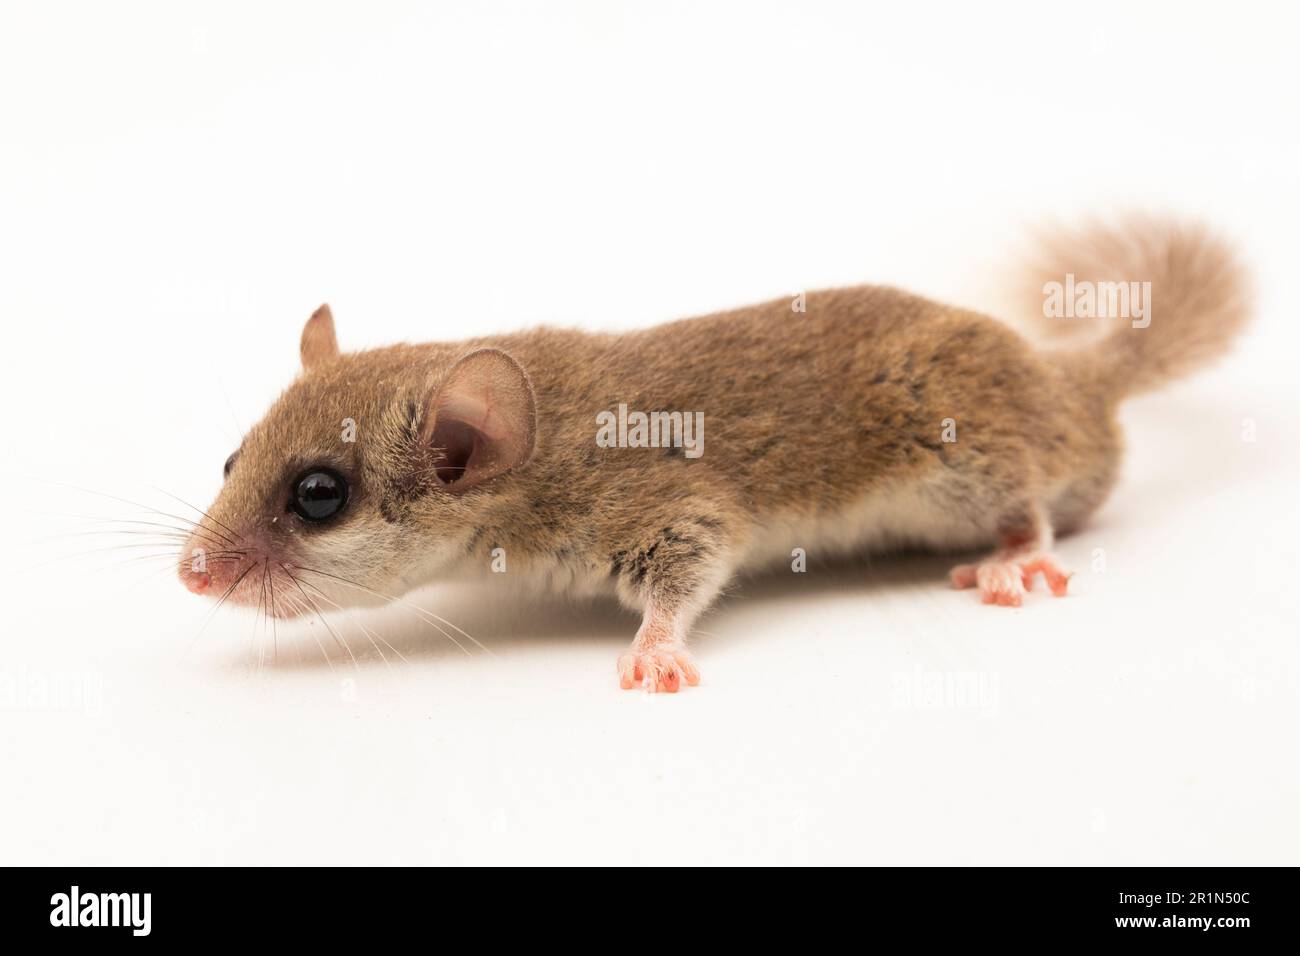 The woodland dormouse (Graphiurus murinus) African pygmy dormouse isolated on white background Stock Photo